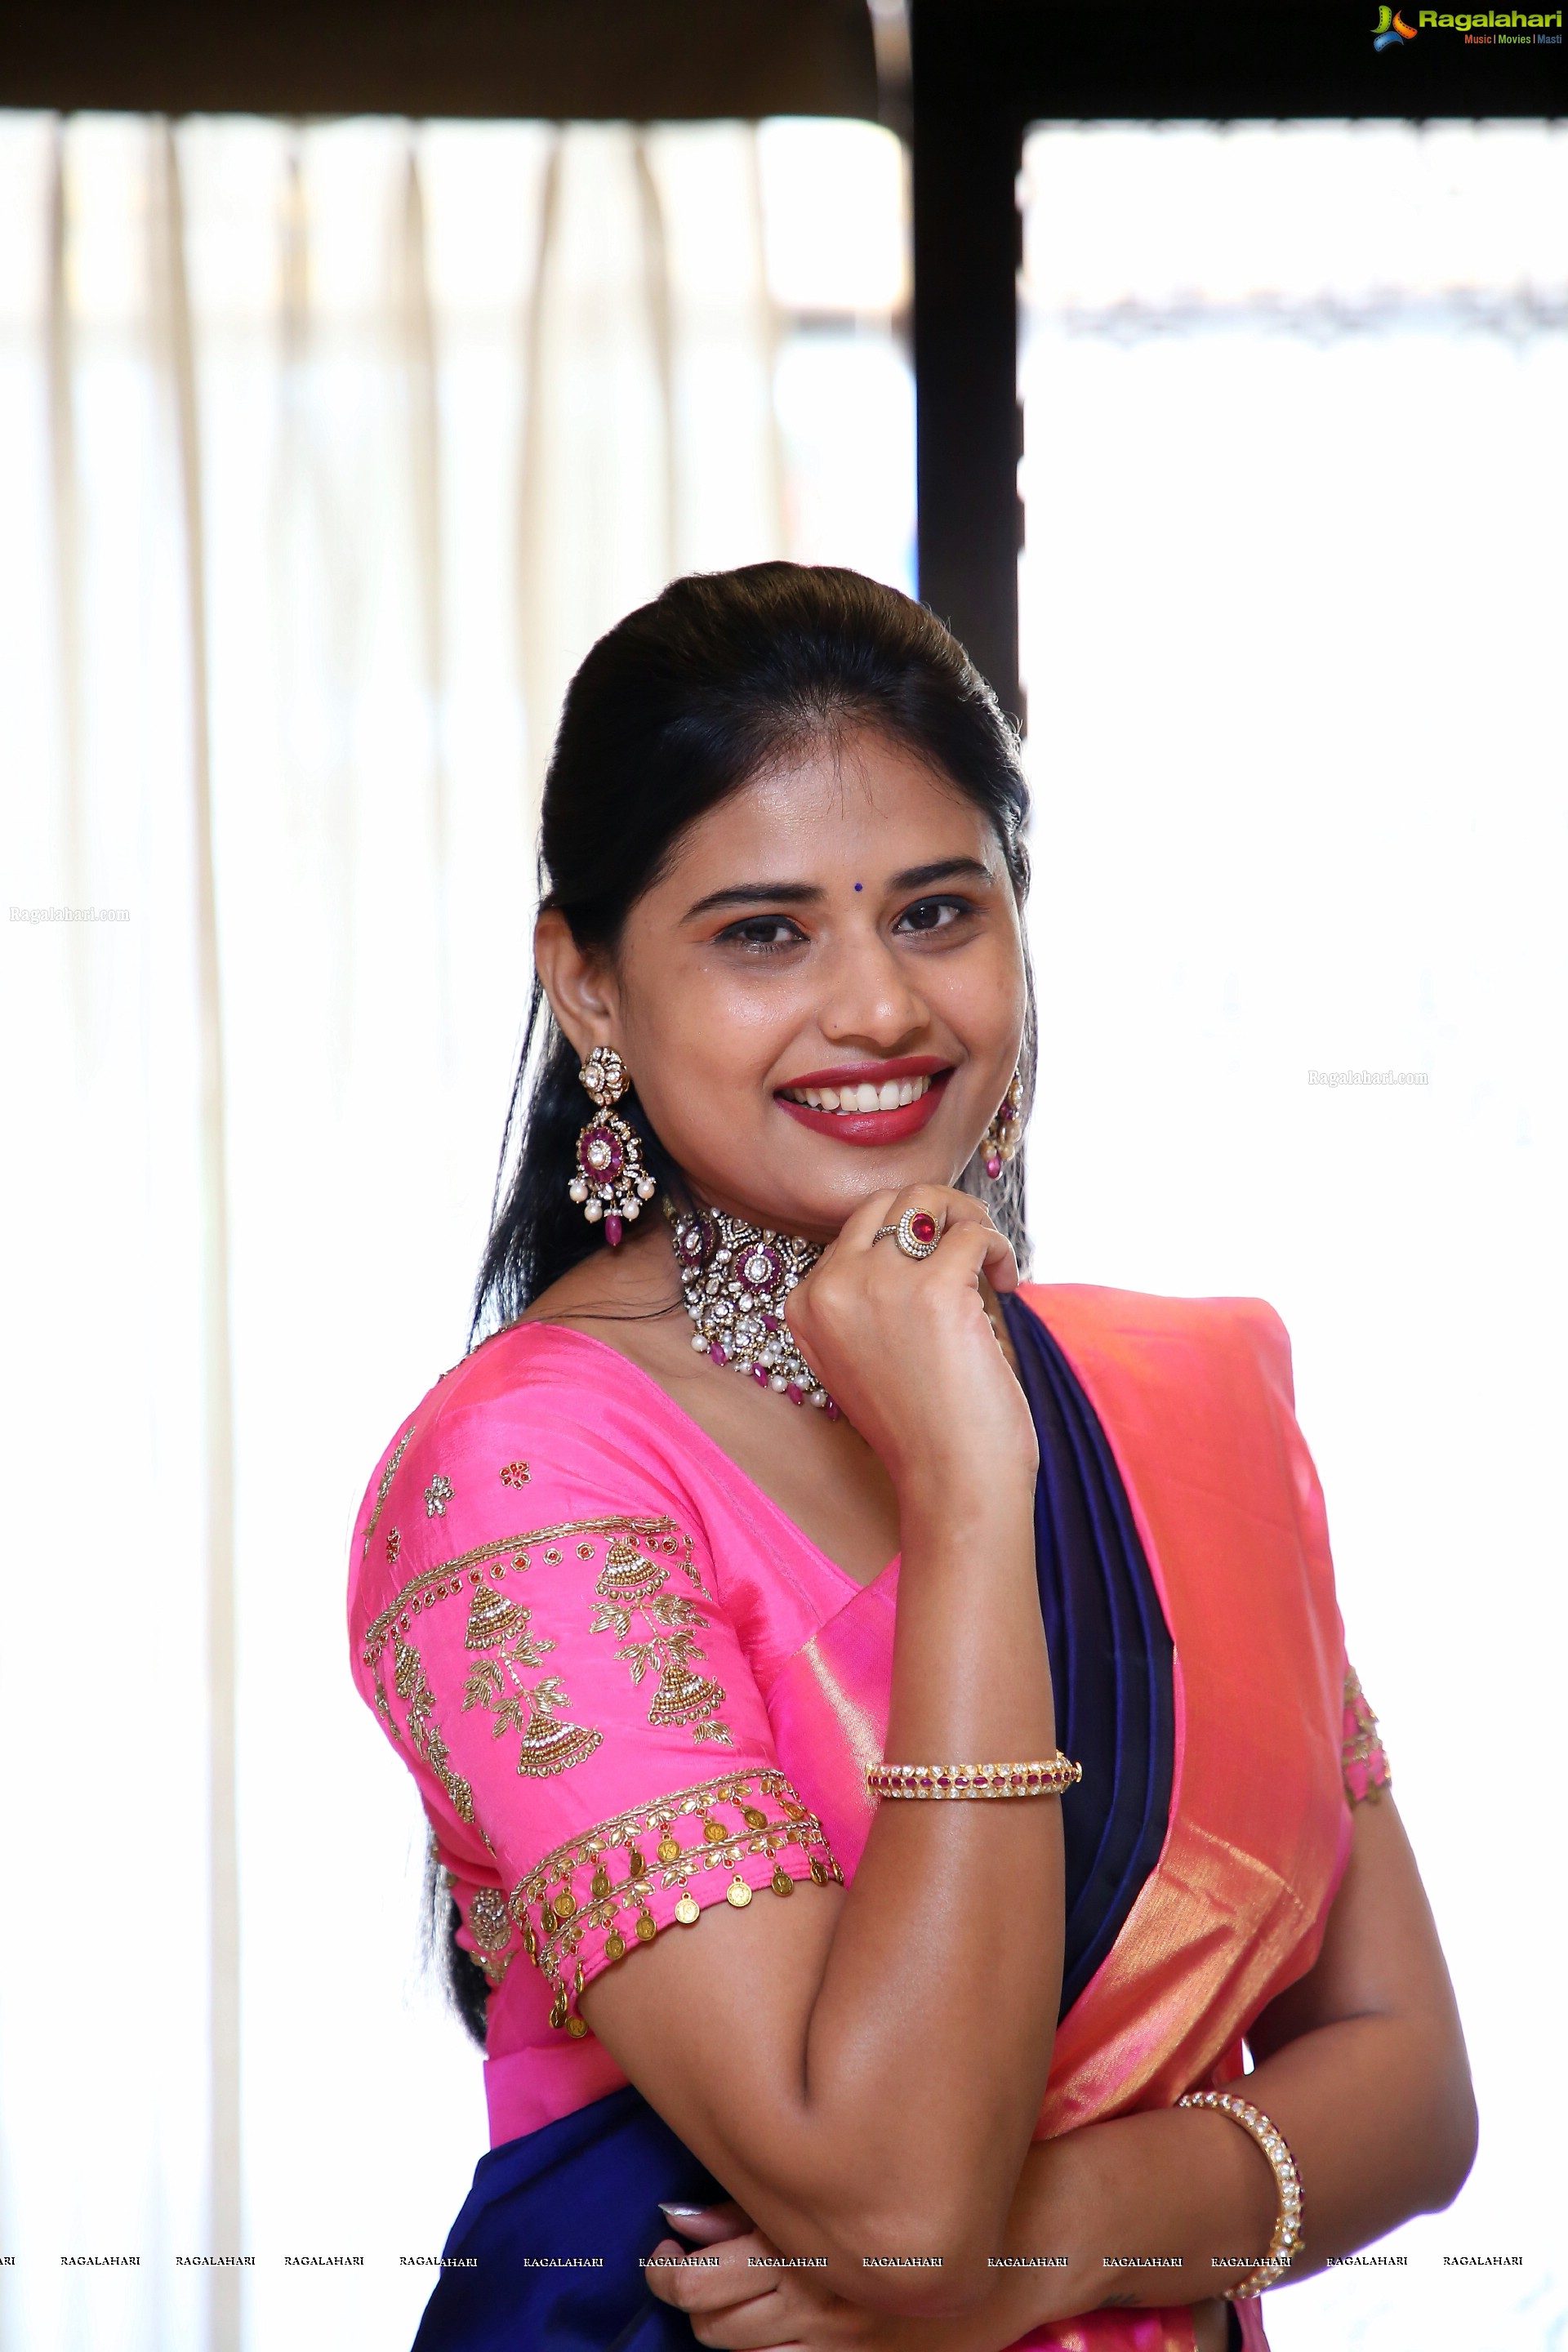 Sahasra Reddy Poses With Jewellery, HD Photo Gallery